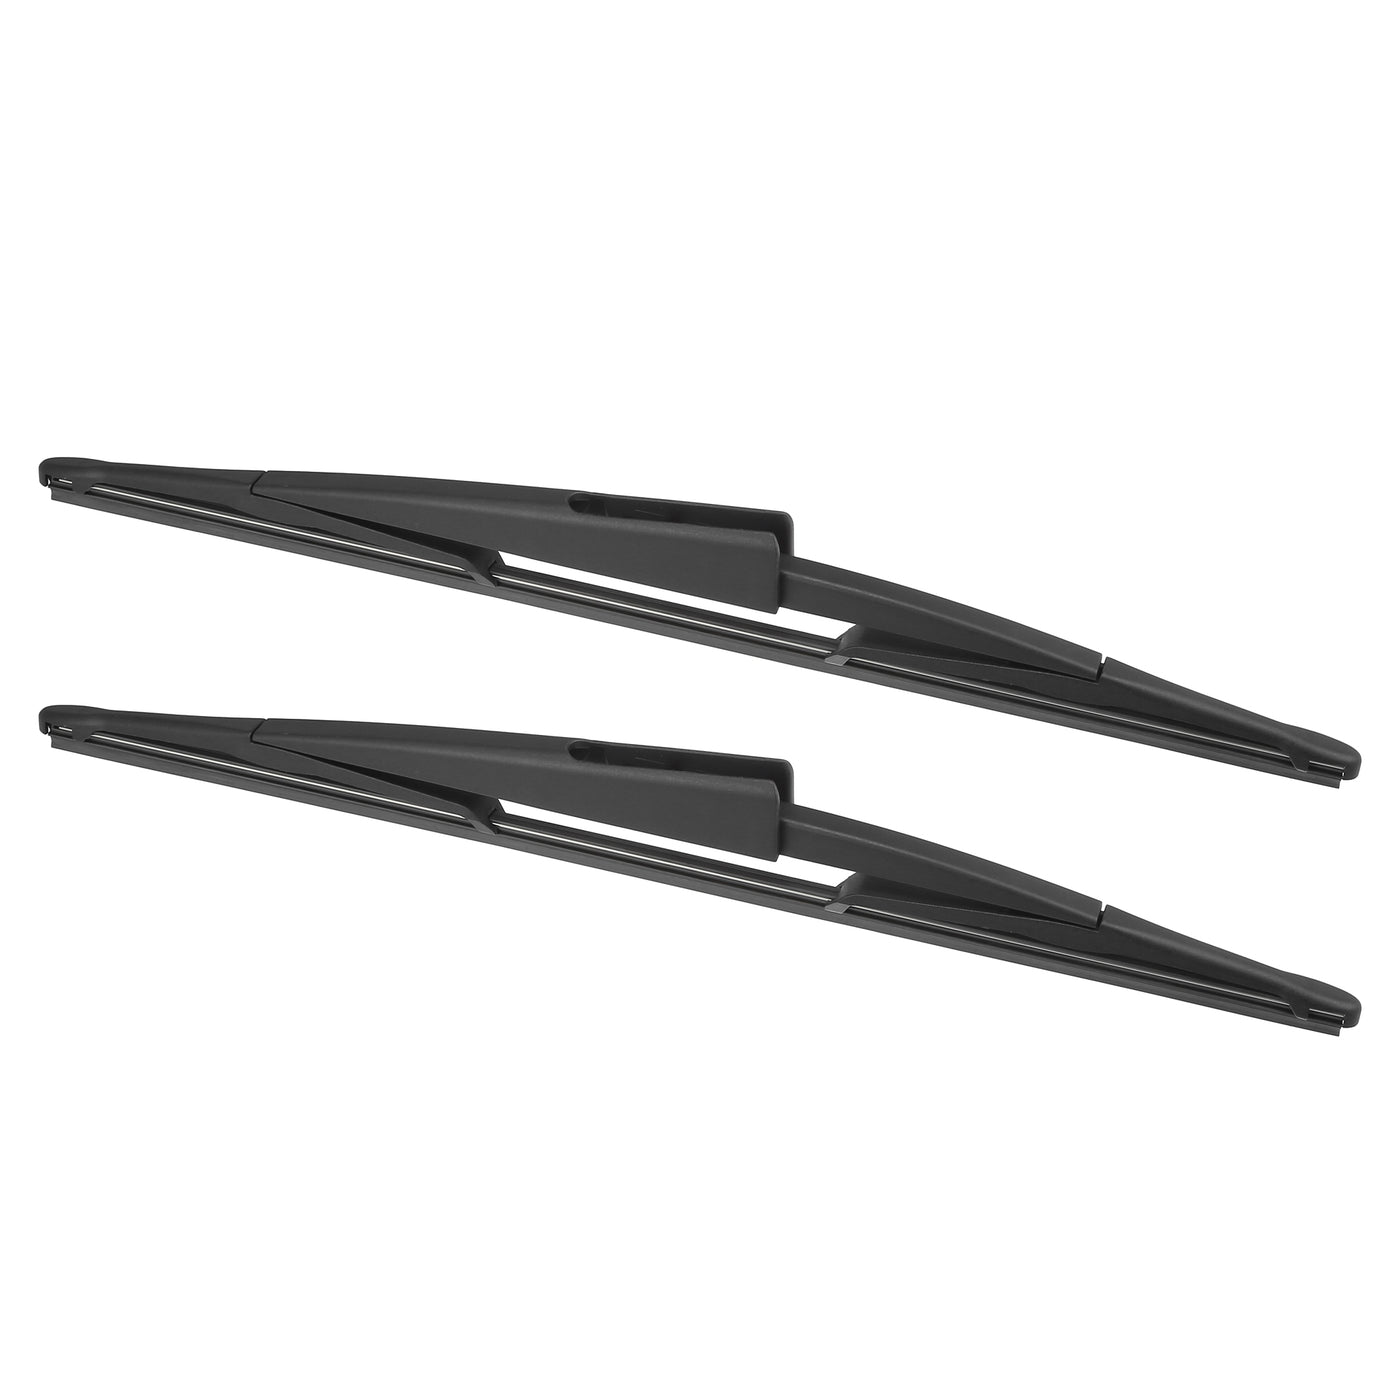 X AUTOHAUX 2pcs Rear Windshield Wiper Blade Replacement for Ford Expedition 2012-2015 for Lincoln Navigator 2009-2016